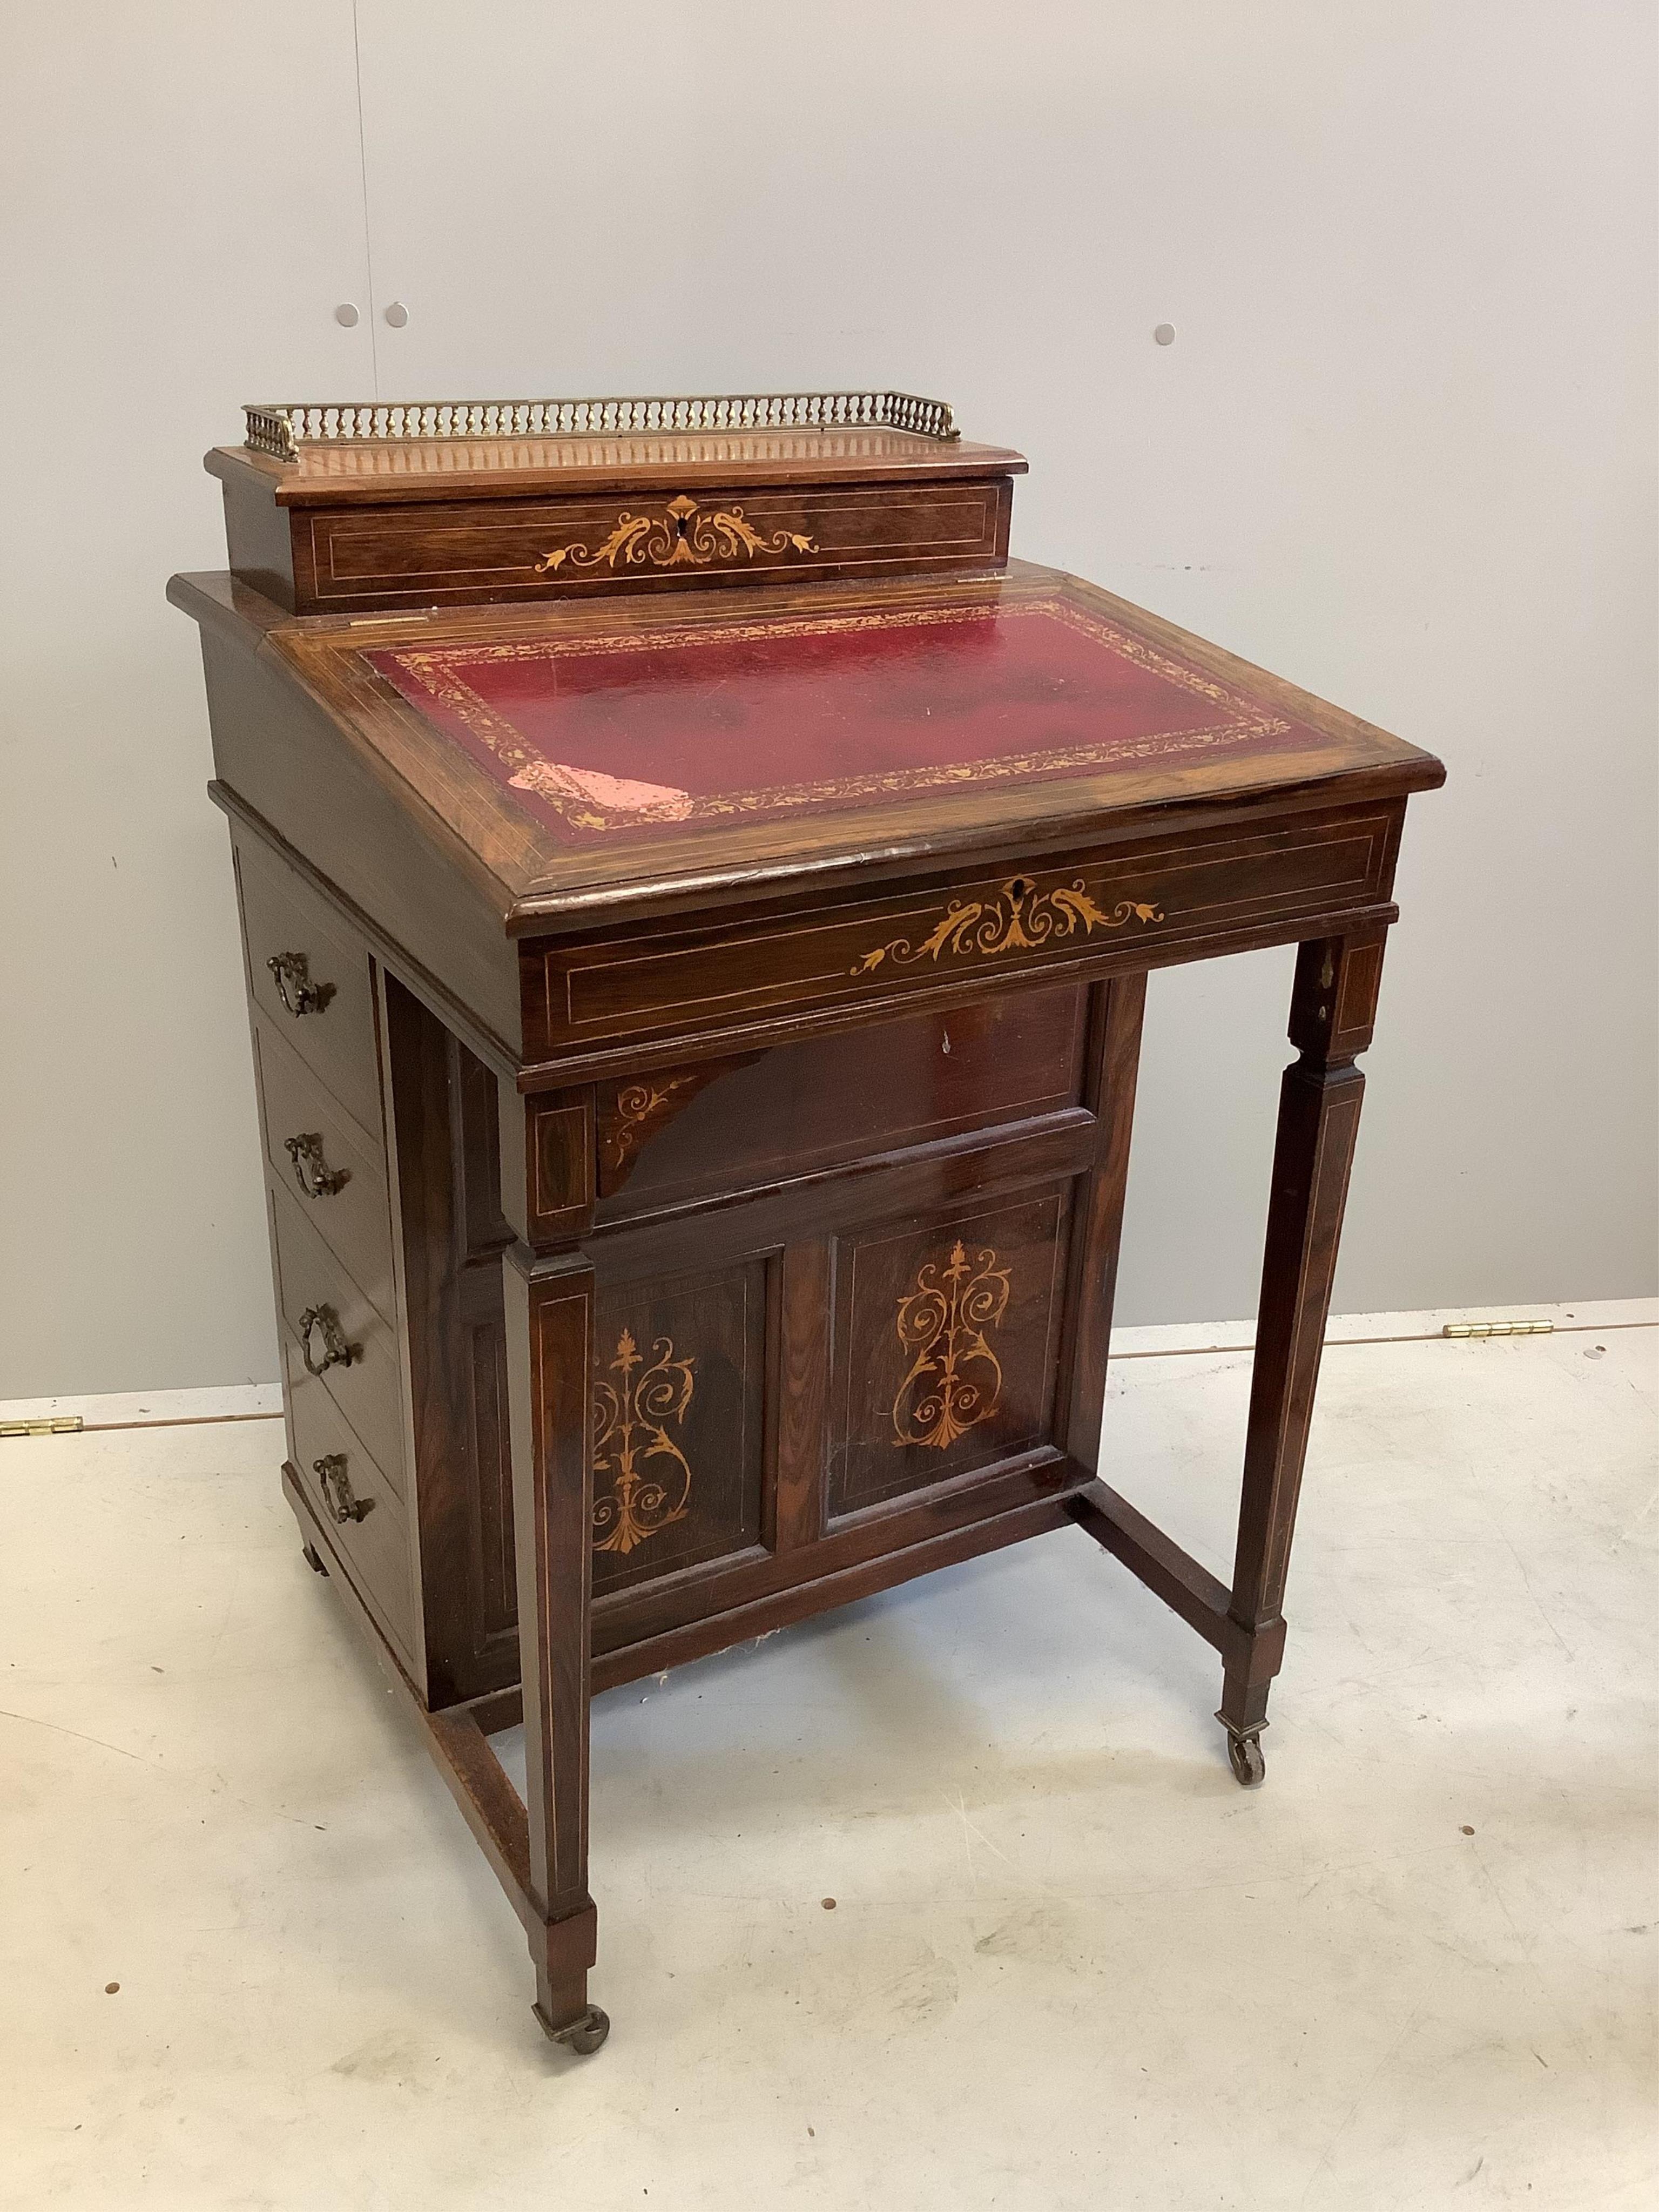 A late Victorian inlaid rosewood davenport, width 56cm, depth 53cm, height 84cm. Condition - fair